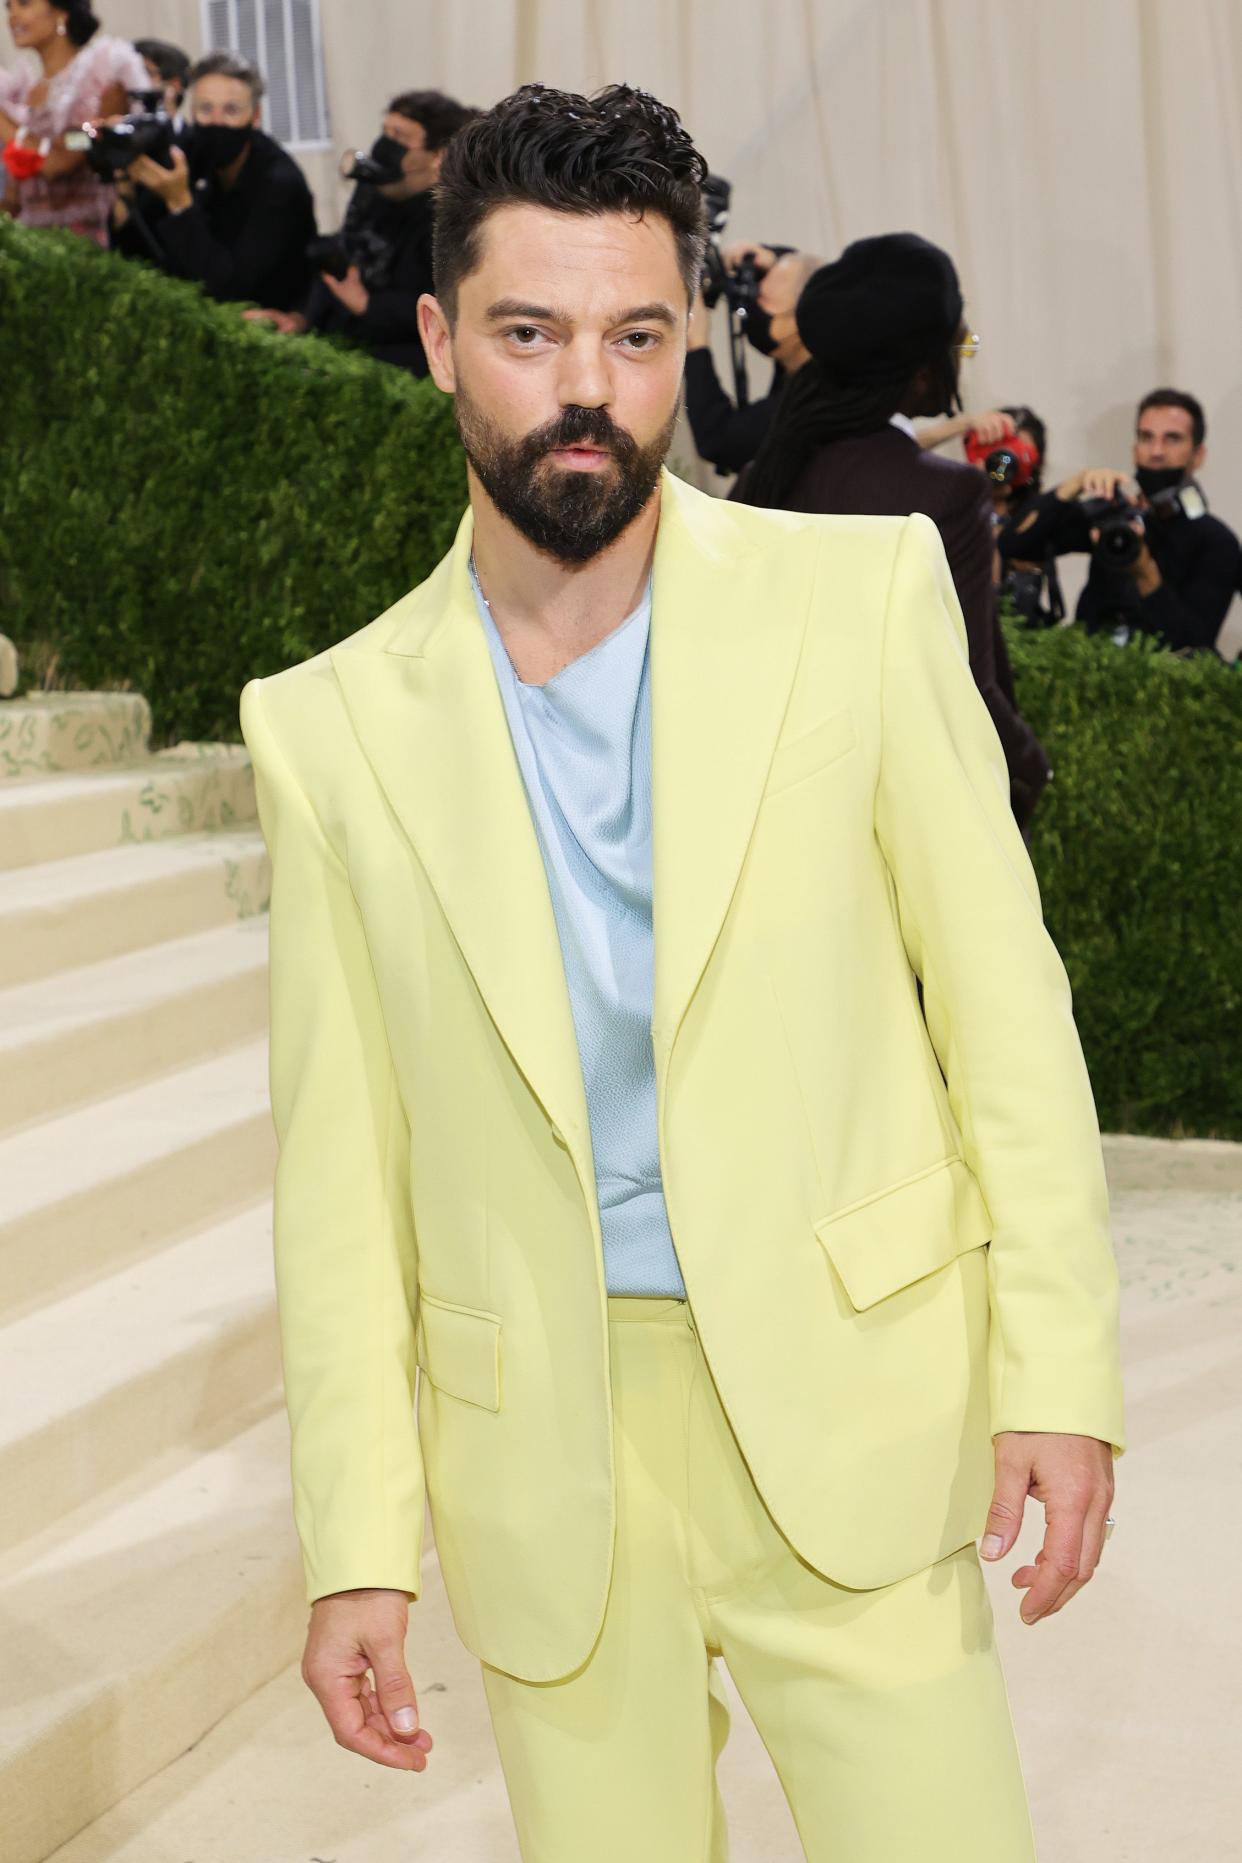 Dominic Cooper attends The 2021 Met Gala Celebrating In America: A Lexicon Of Fashion at Metropolitan Museum of Art on Sept. 13, 2021 in New York.